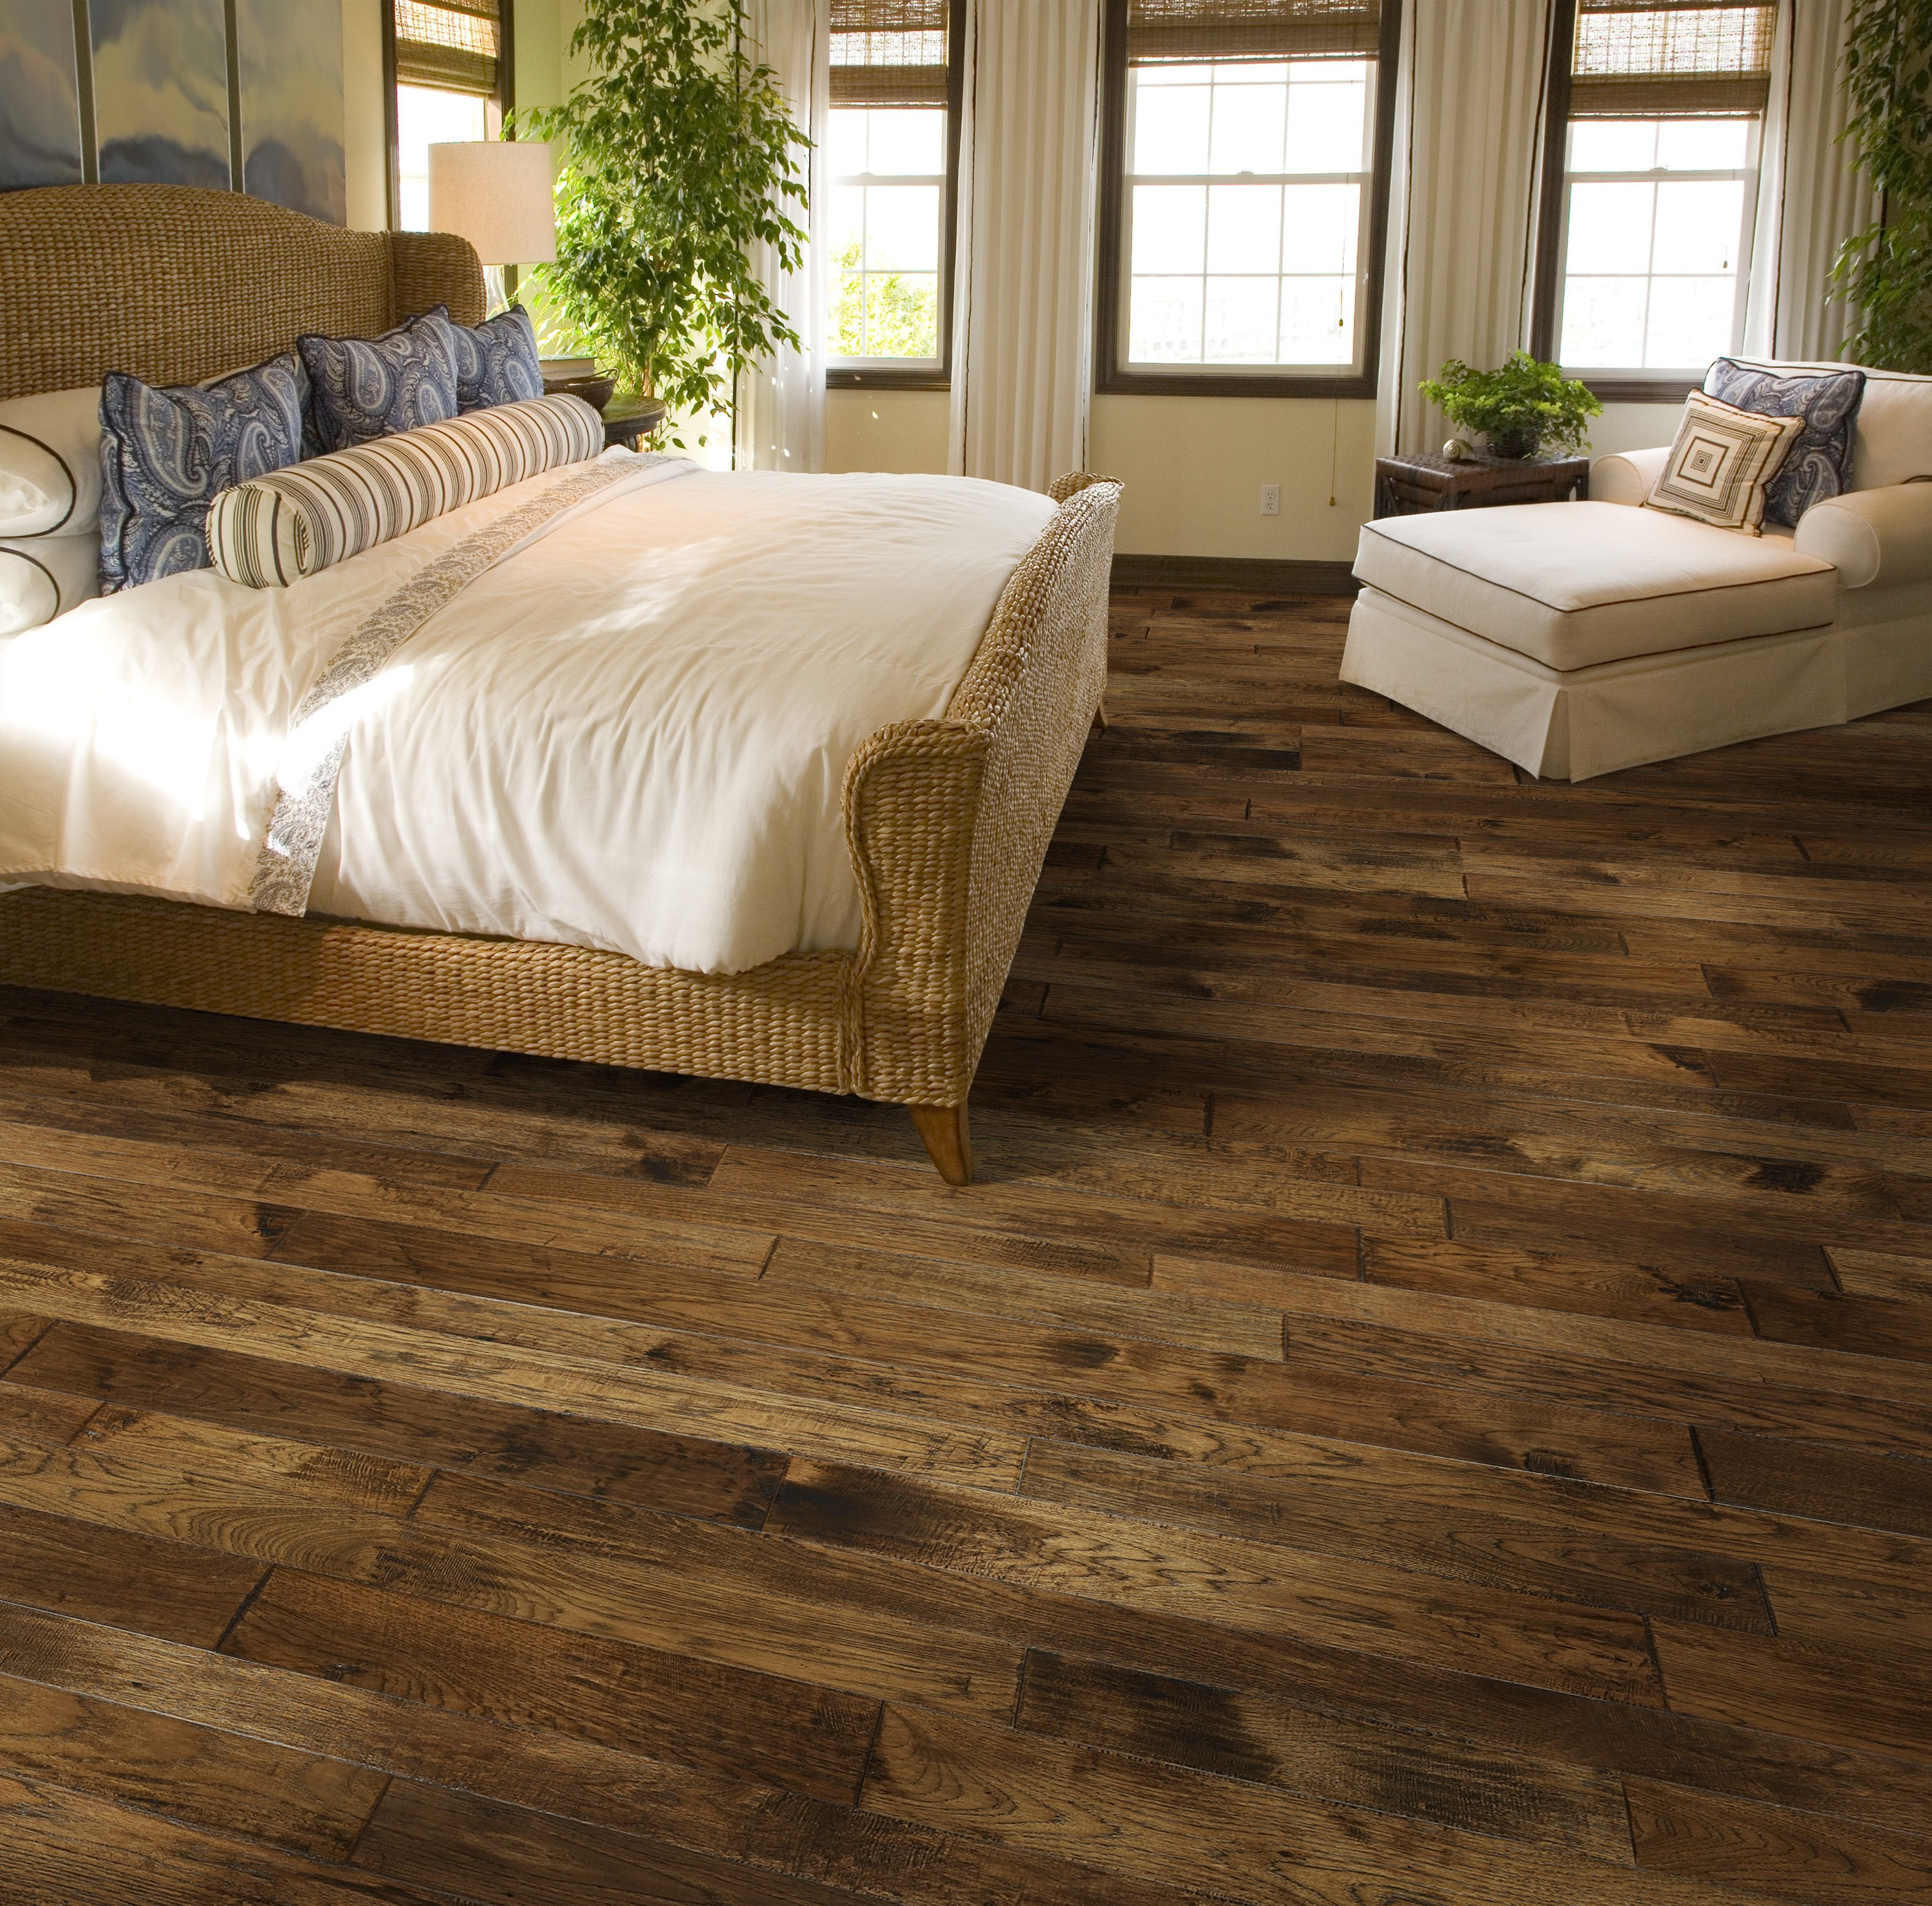 24 Ideal Hardwood Floor Suppliers Denver 2024 free download hardwood floor suppliers denver of chalet whistler hickory real wood floors this is our flooring intended for chalet whistler hickory real wood floors this is our flooring chalet hickory whi